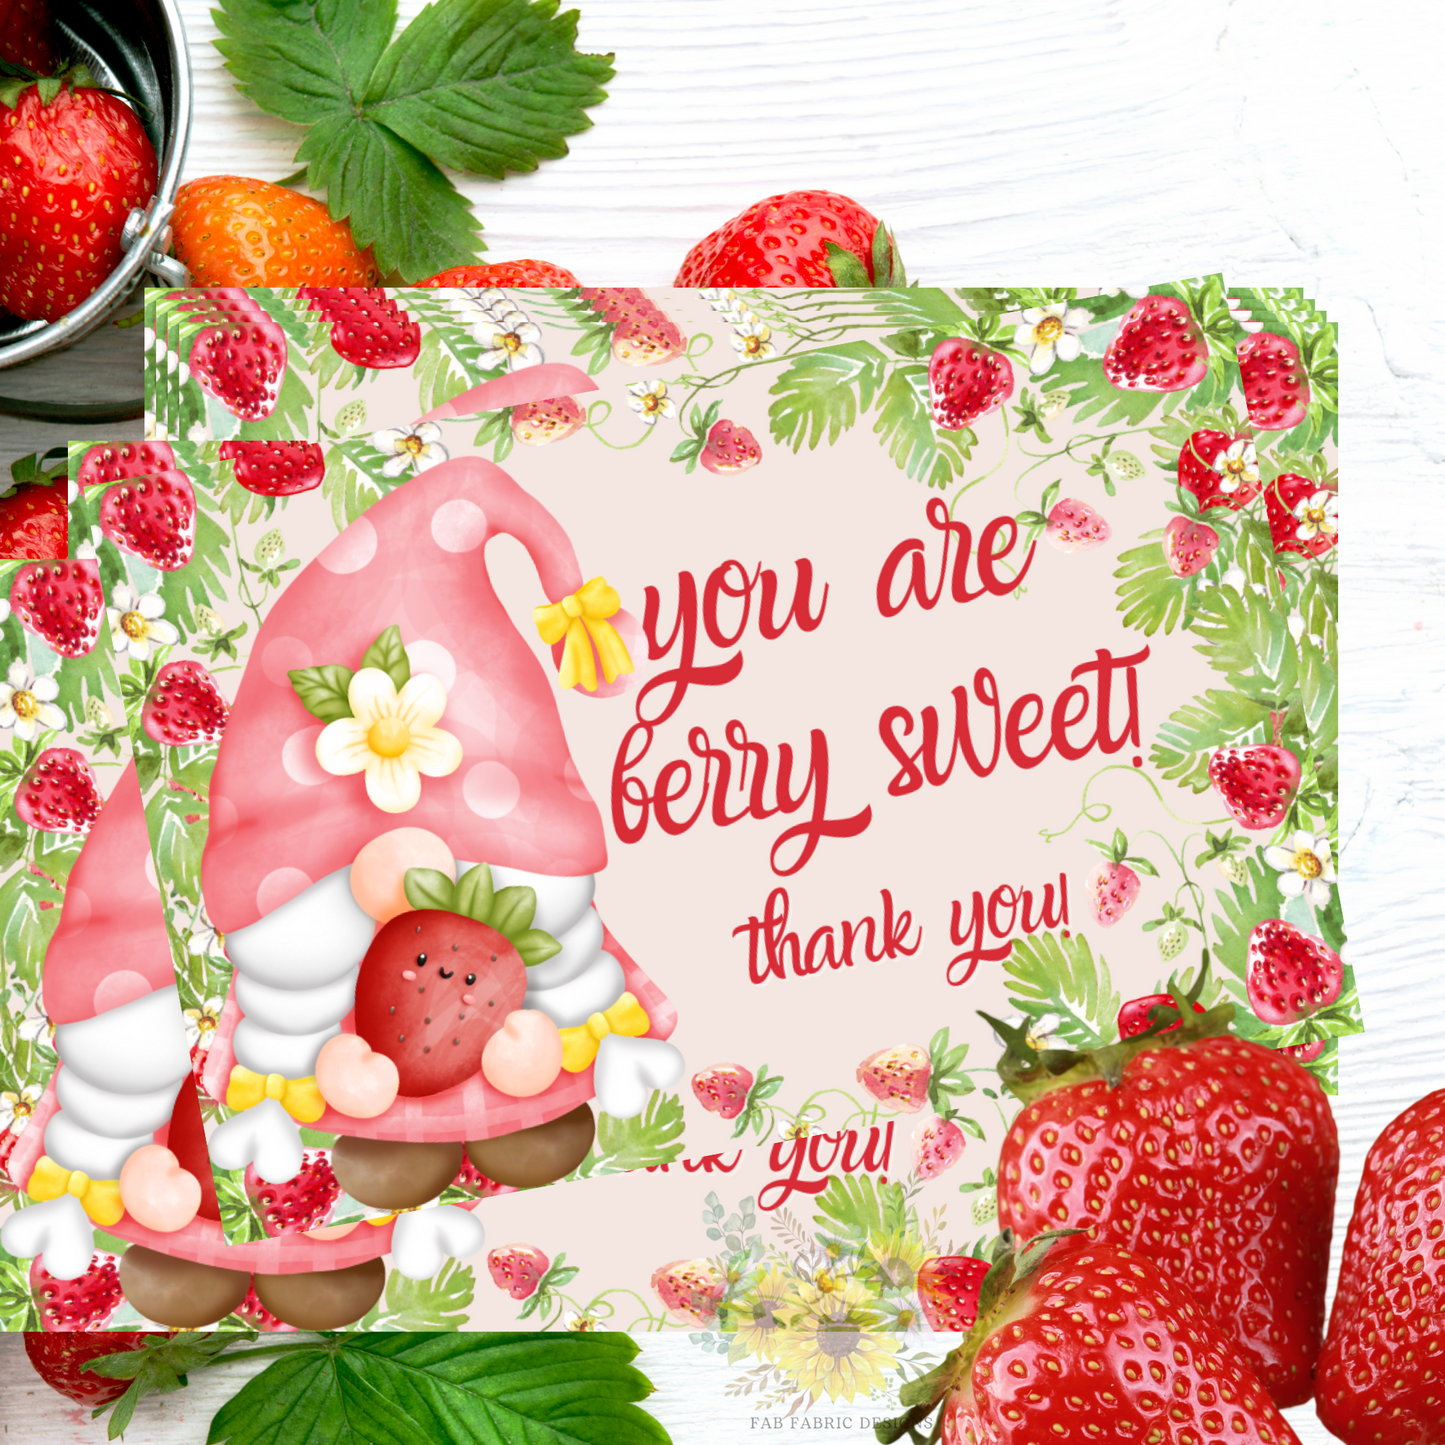 You Are Berry Sweet with Gnome, Thank You Cards